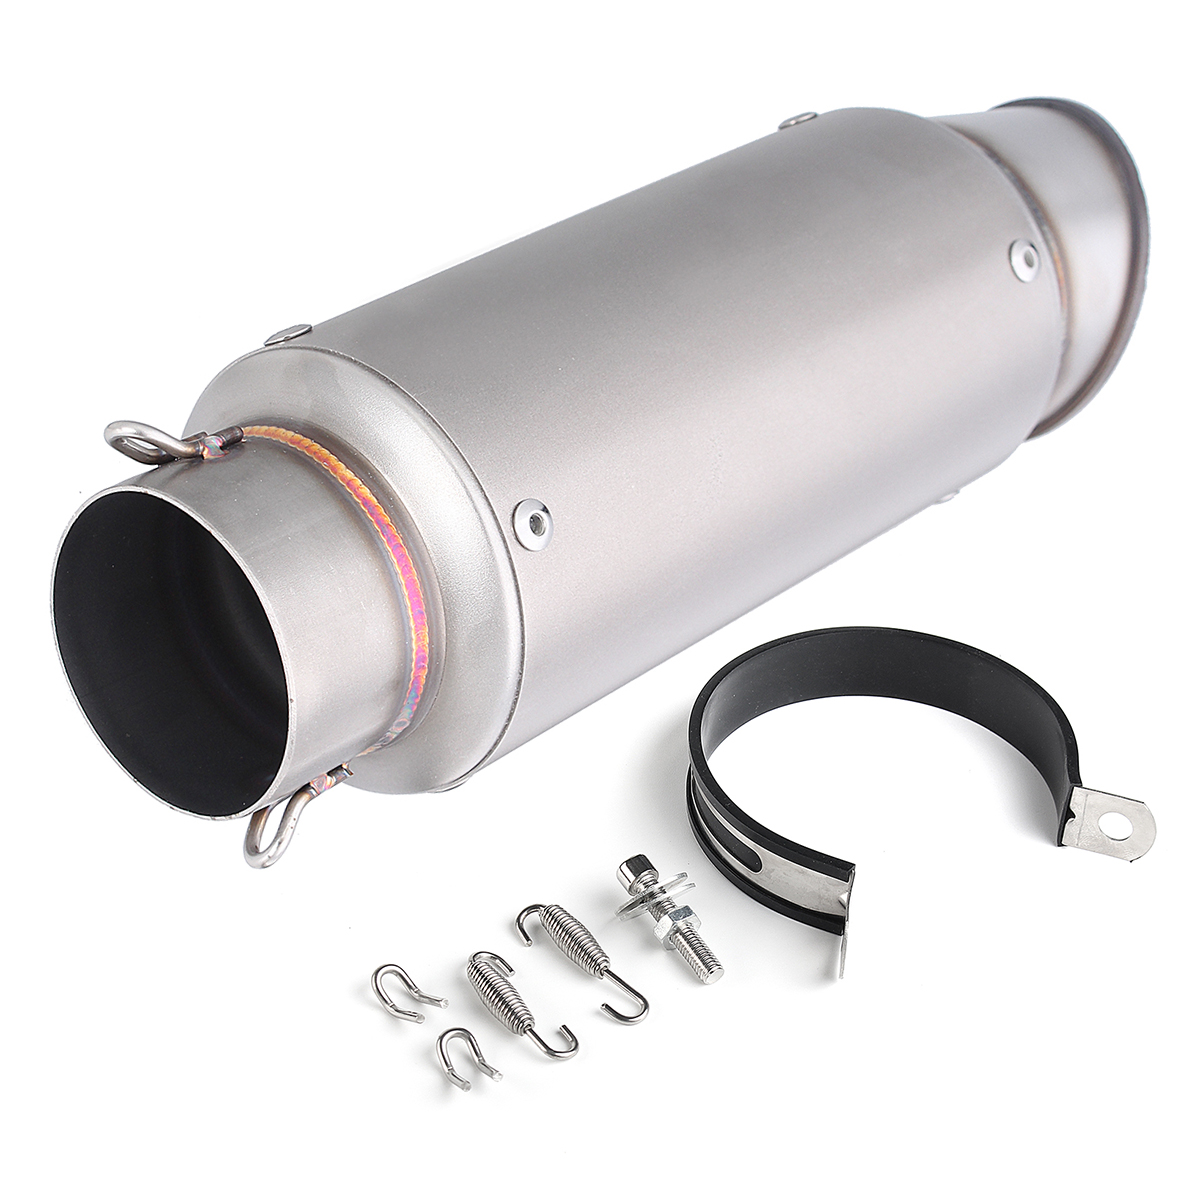 

61mm Exhaust Muffler Pipe Universal Stainless Steel For Motorcycle ATV